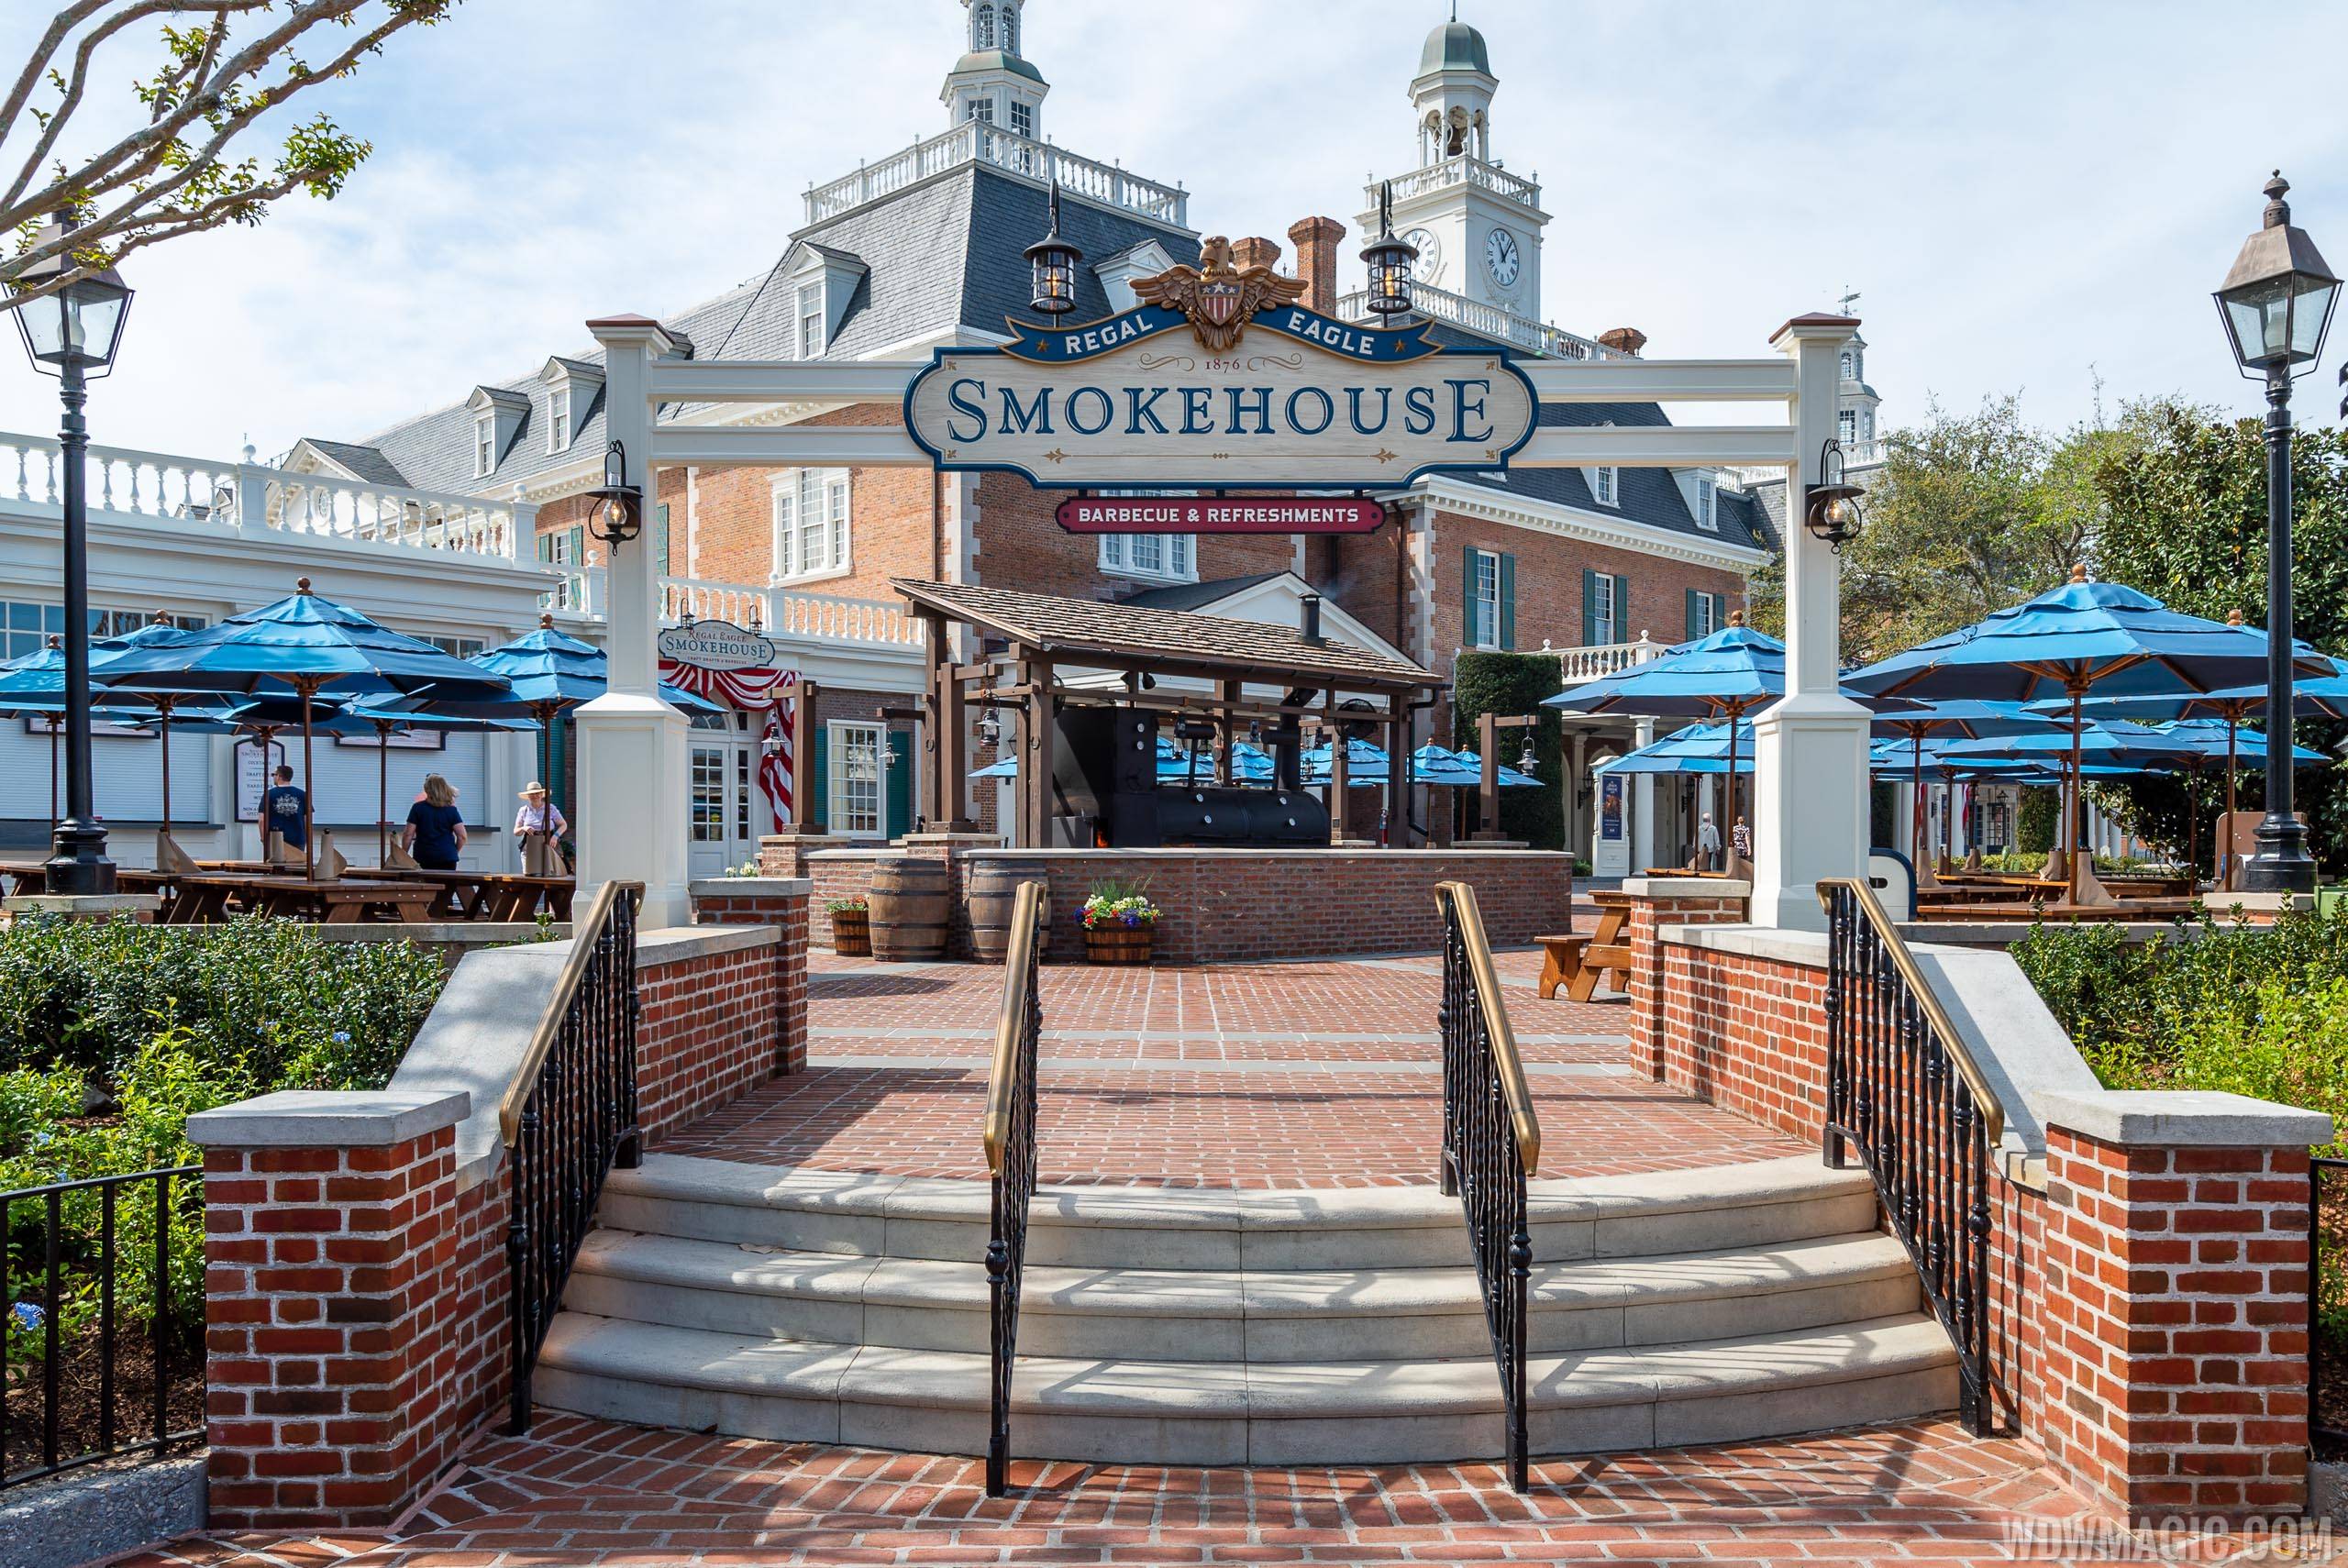 The new Regal Eagle Smokehouse looks like it will reopen with Epcot on July 15